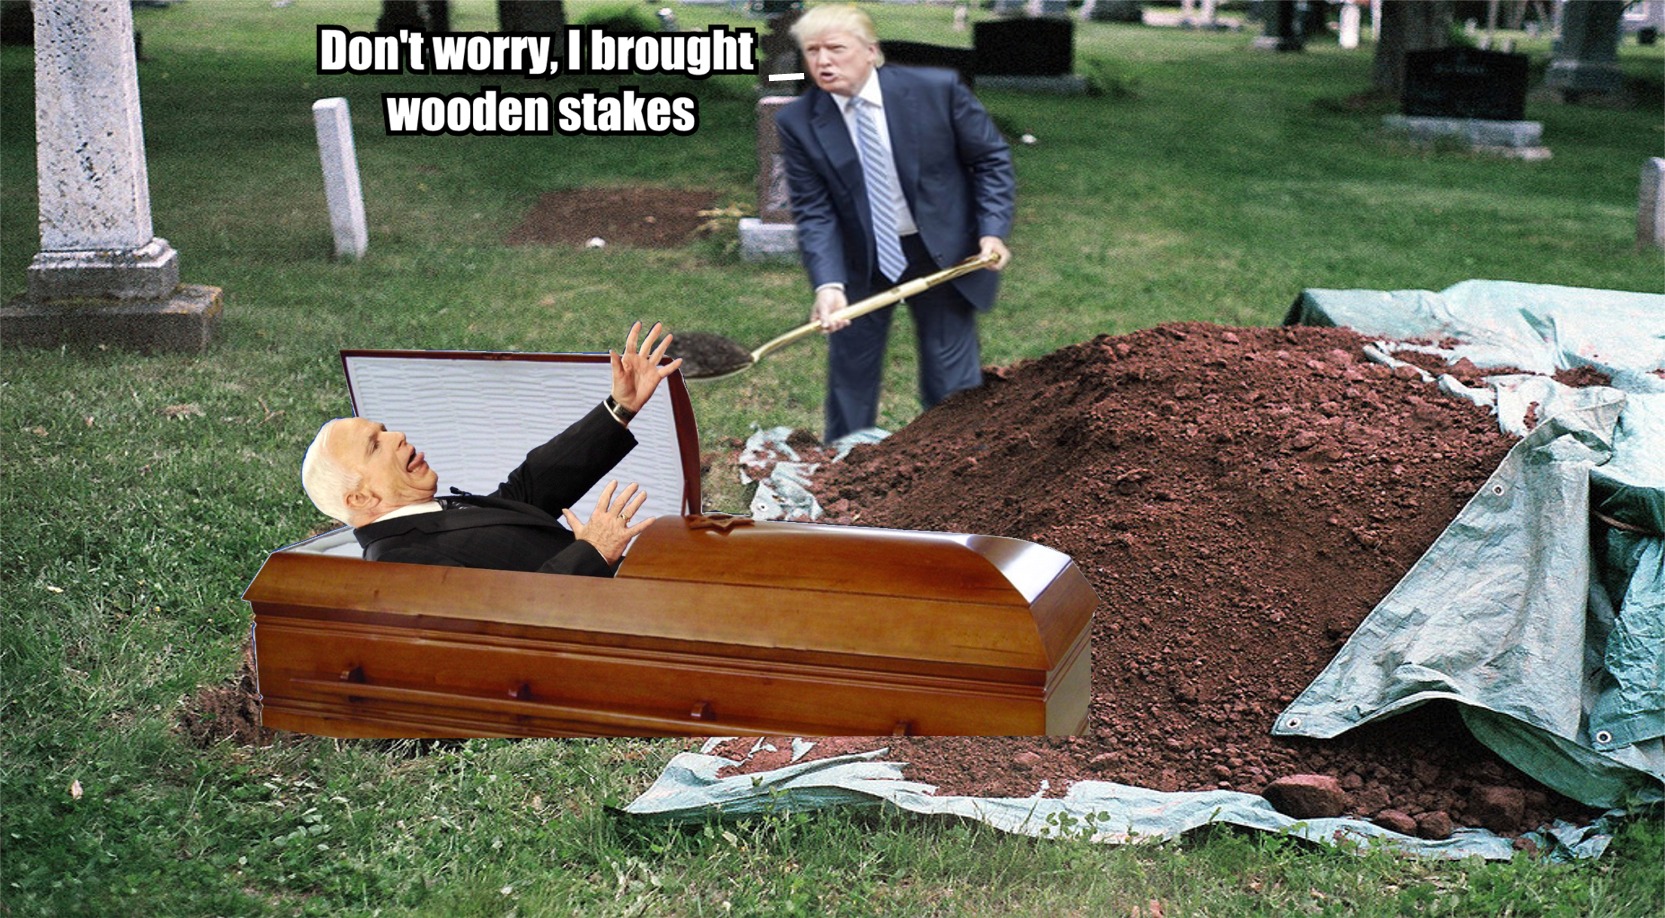 memes - fresh grave - Don't worry, I brought wooden stakes